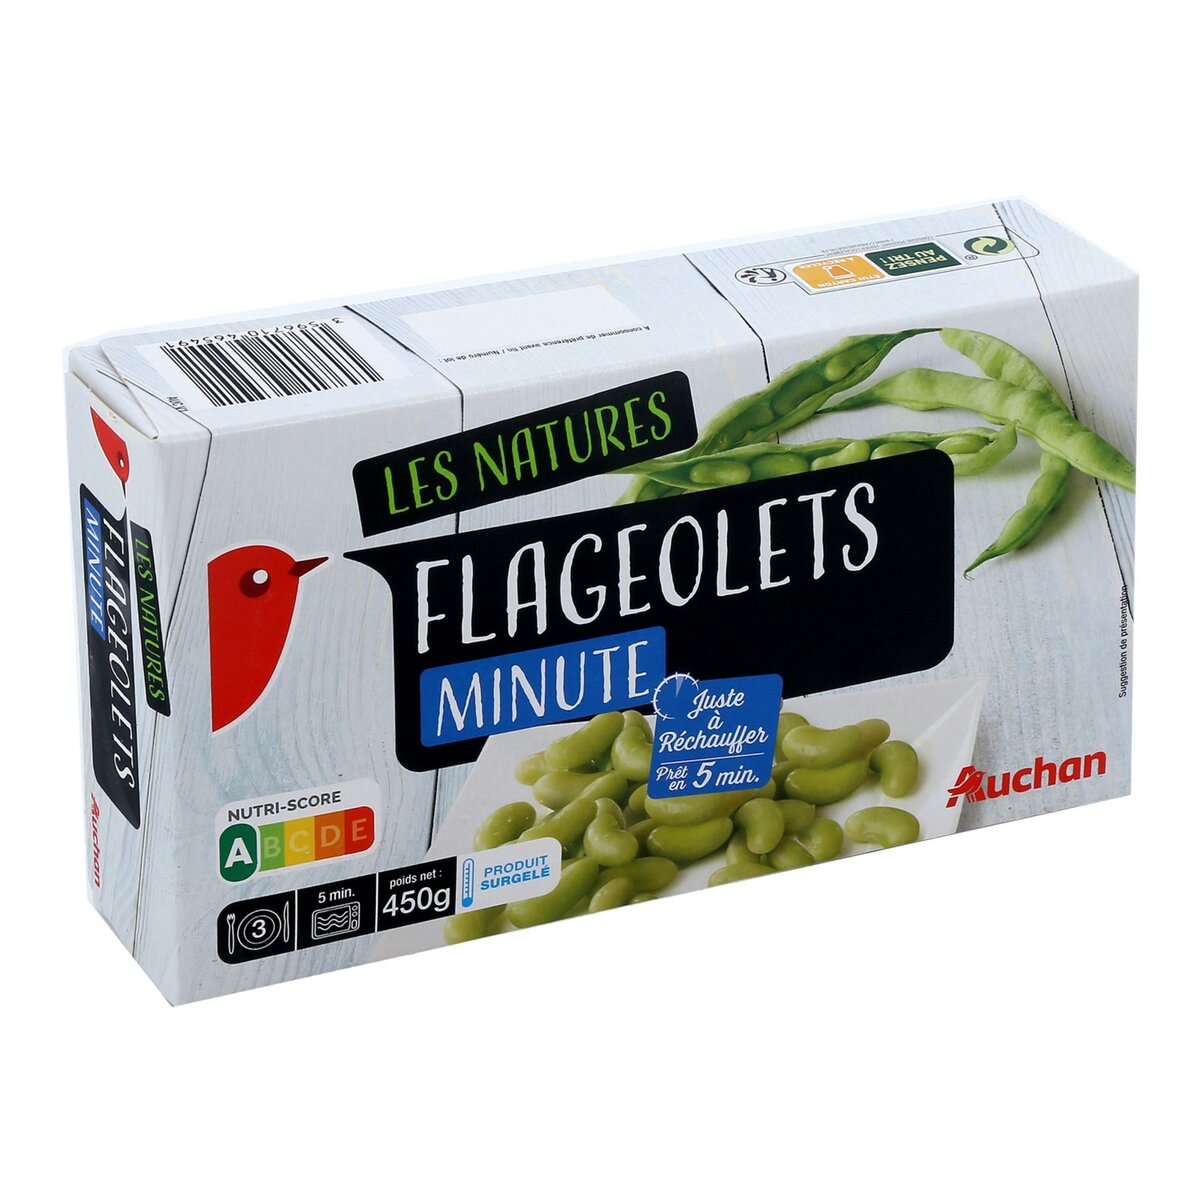 AUCHAN Flageolets minute 3 portions 450g